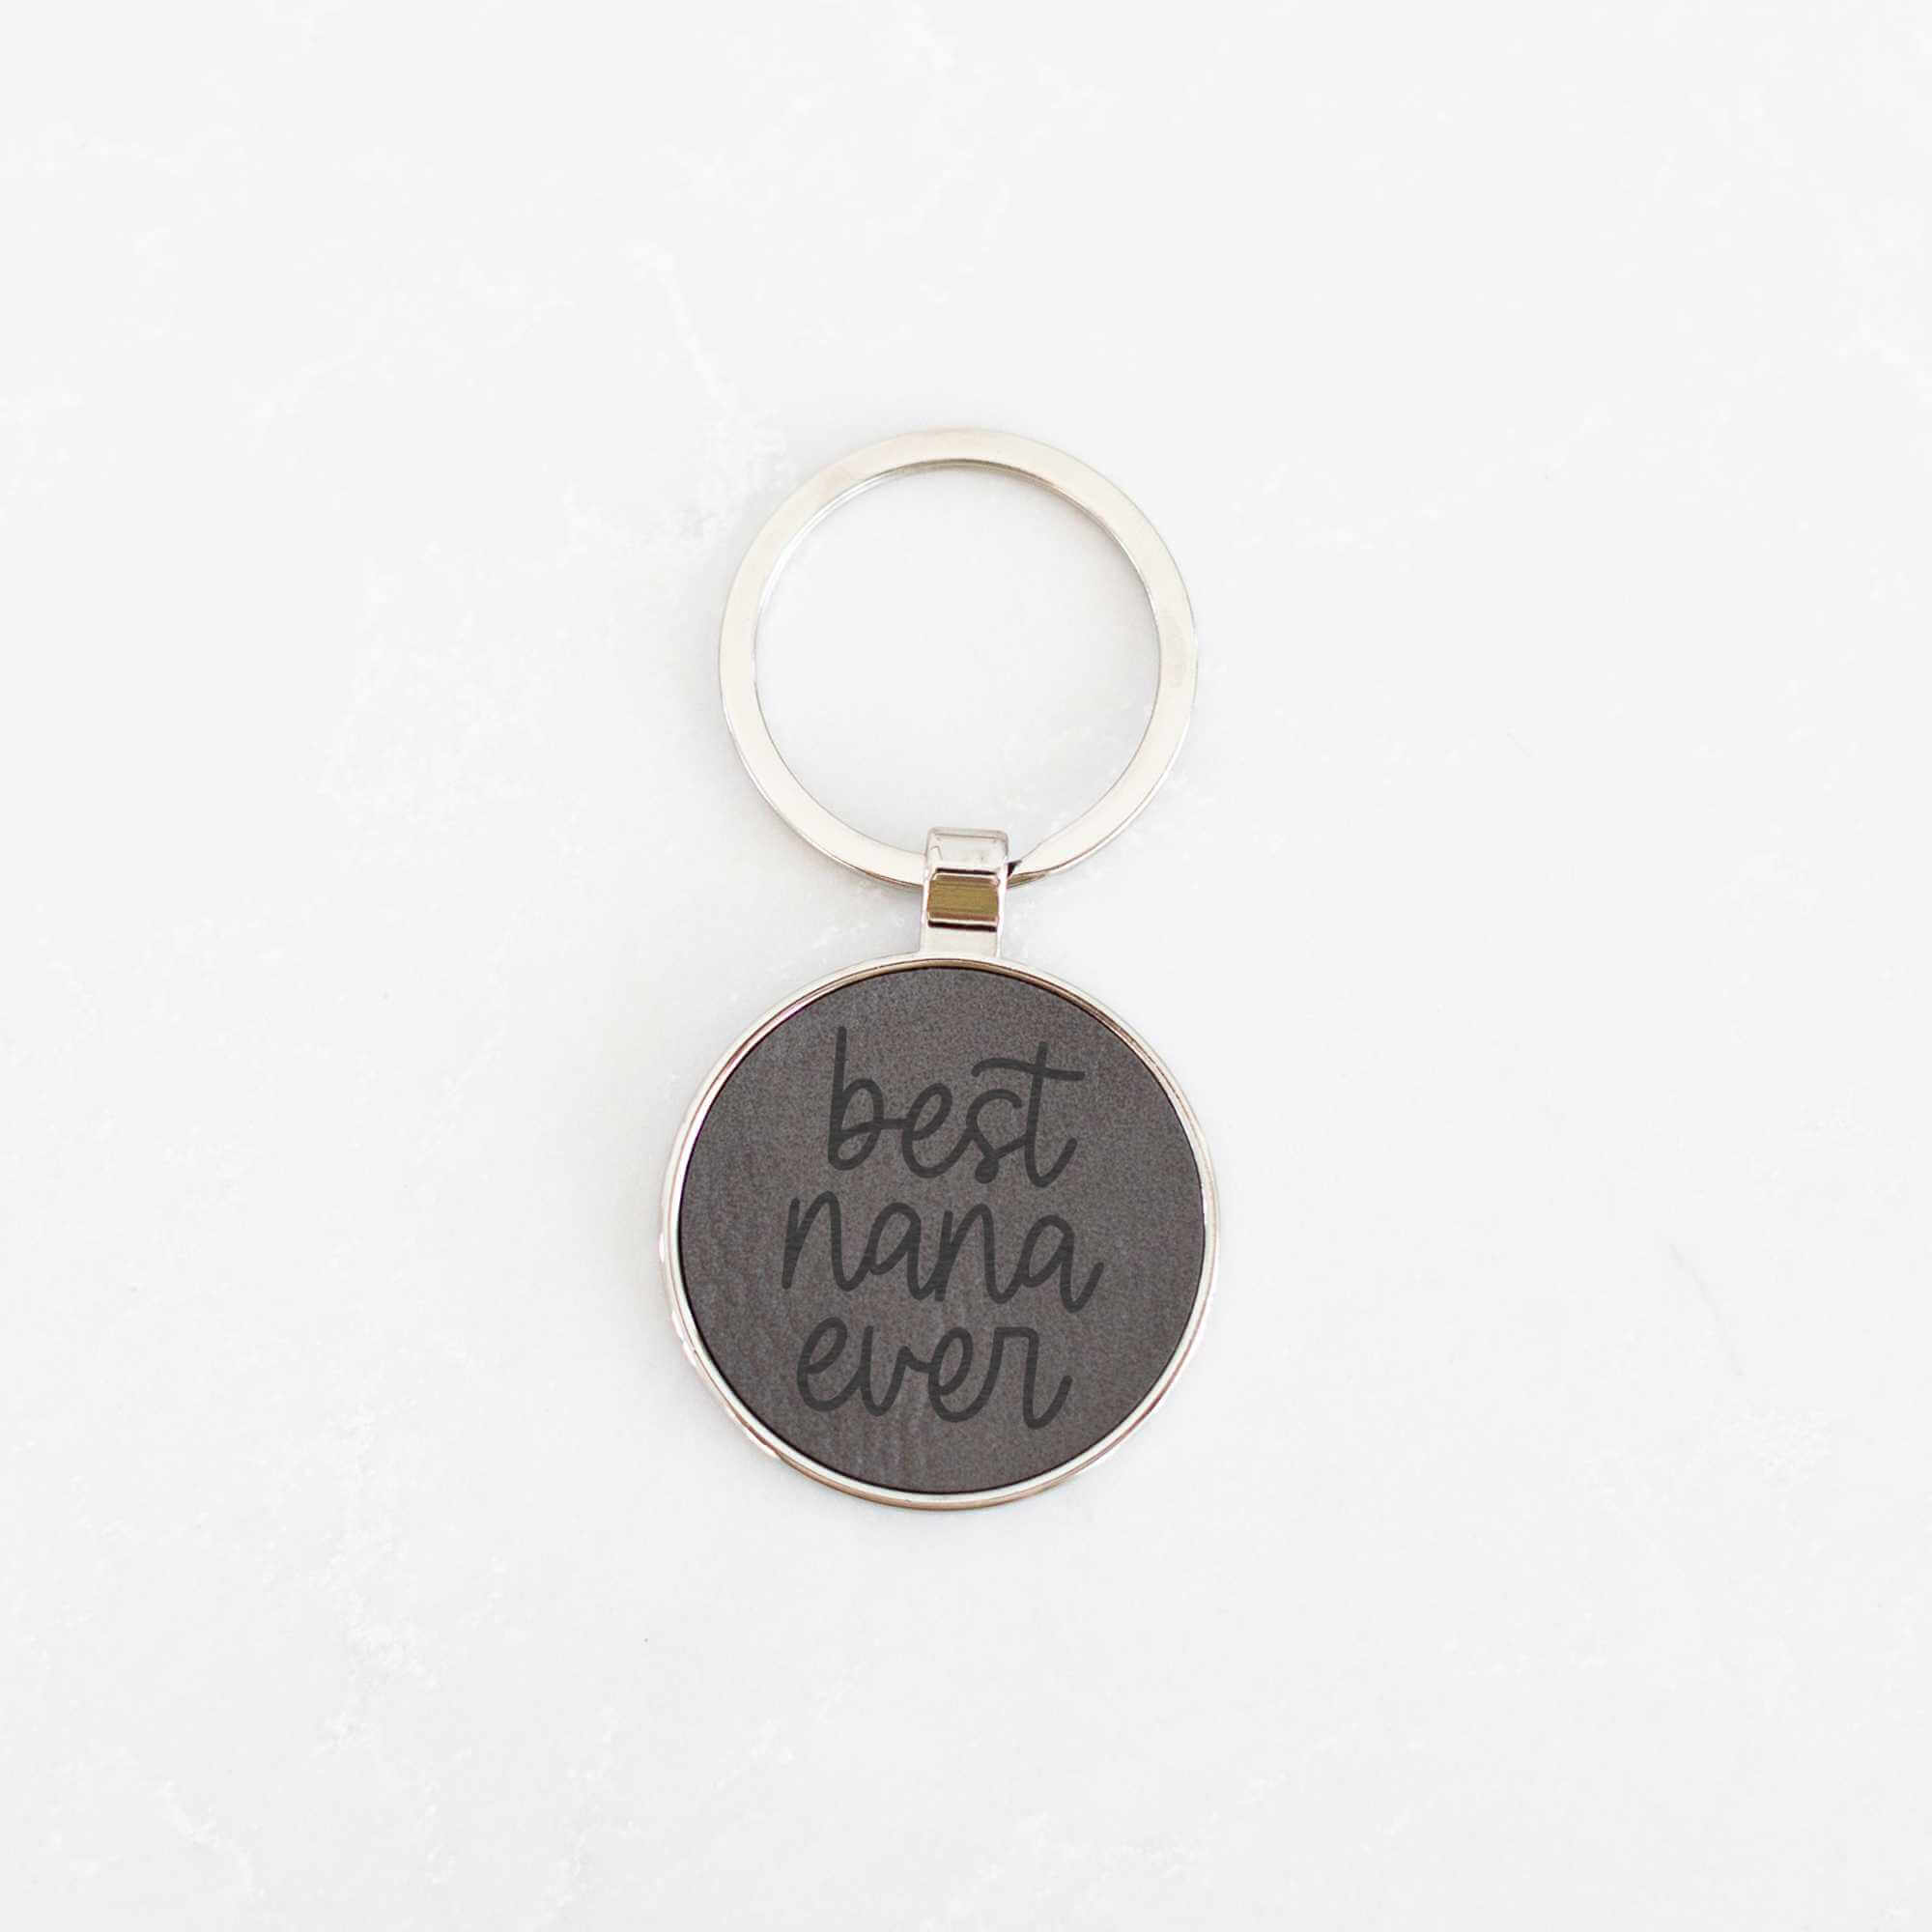 Best [NAME] Ever - Round Vegan Leather Keychain